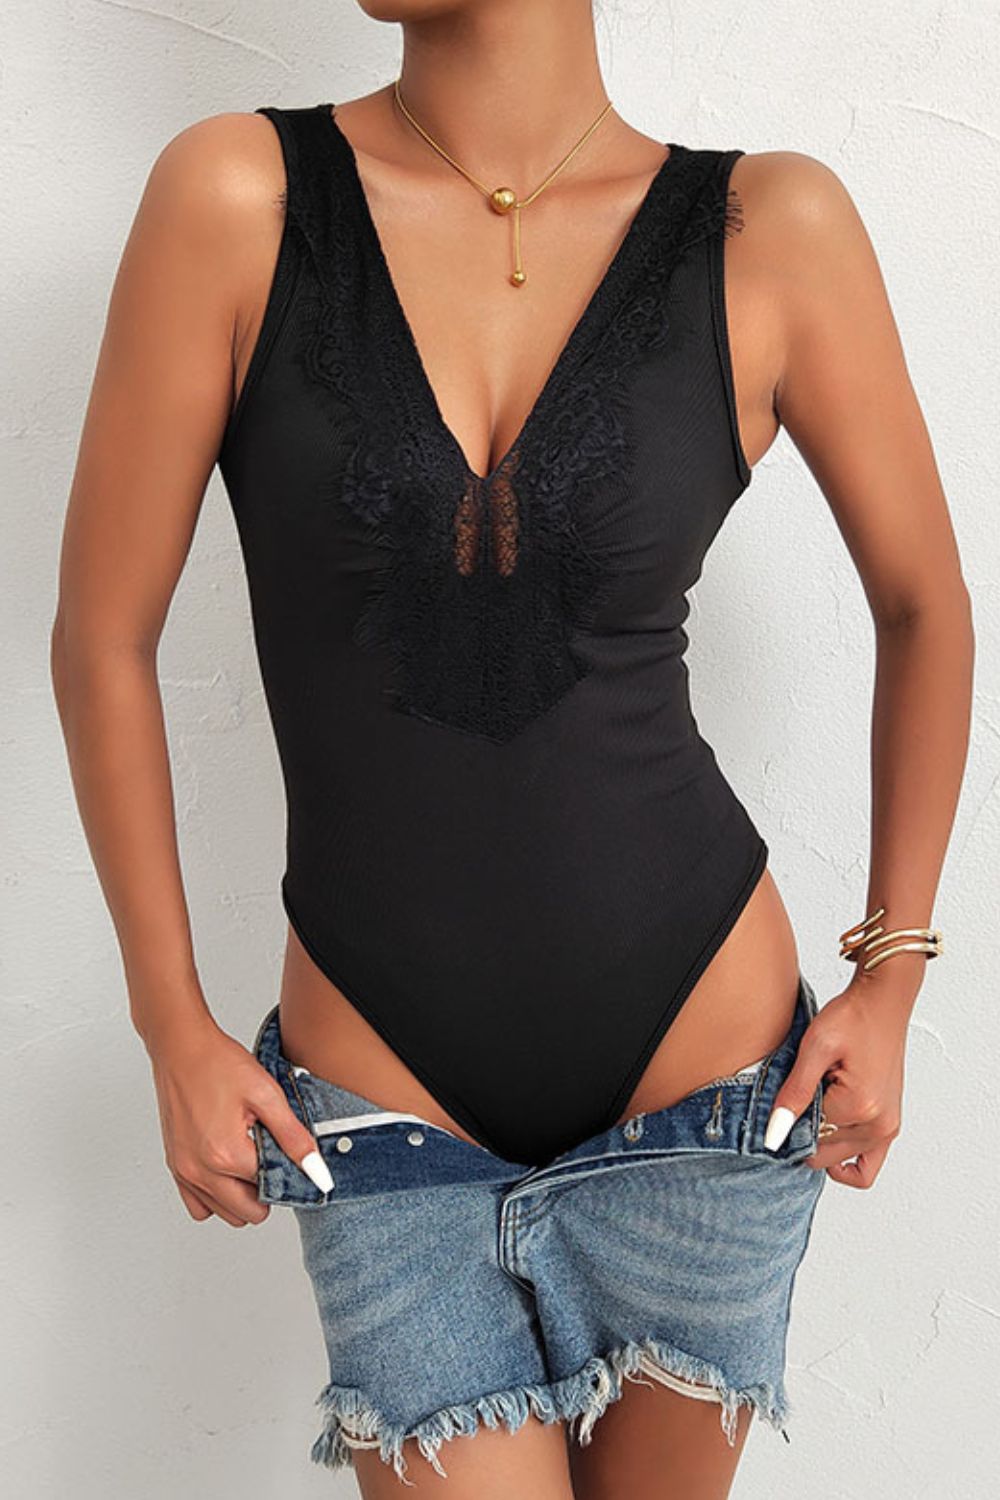 Indulge in Romance with our Spliced Lace Deep V Sleeveless Bodysuit - Embrace your Unique Beauty and Feel Confident in Delicate Luxury. - Guy Christopher